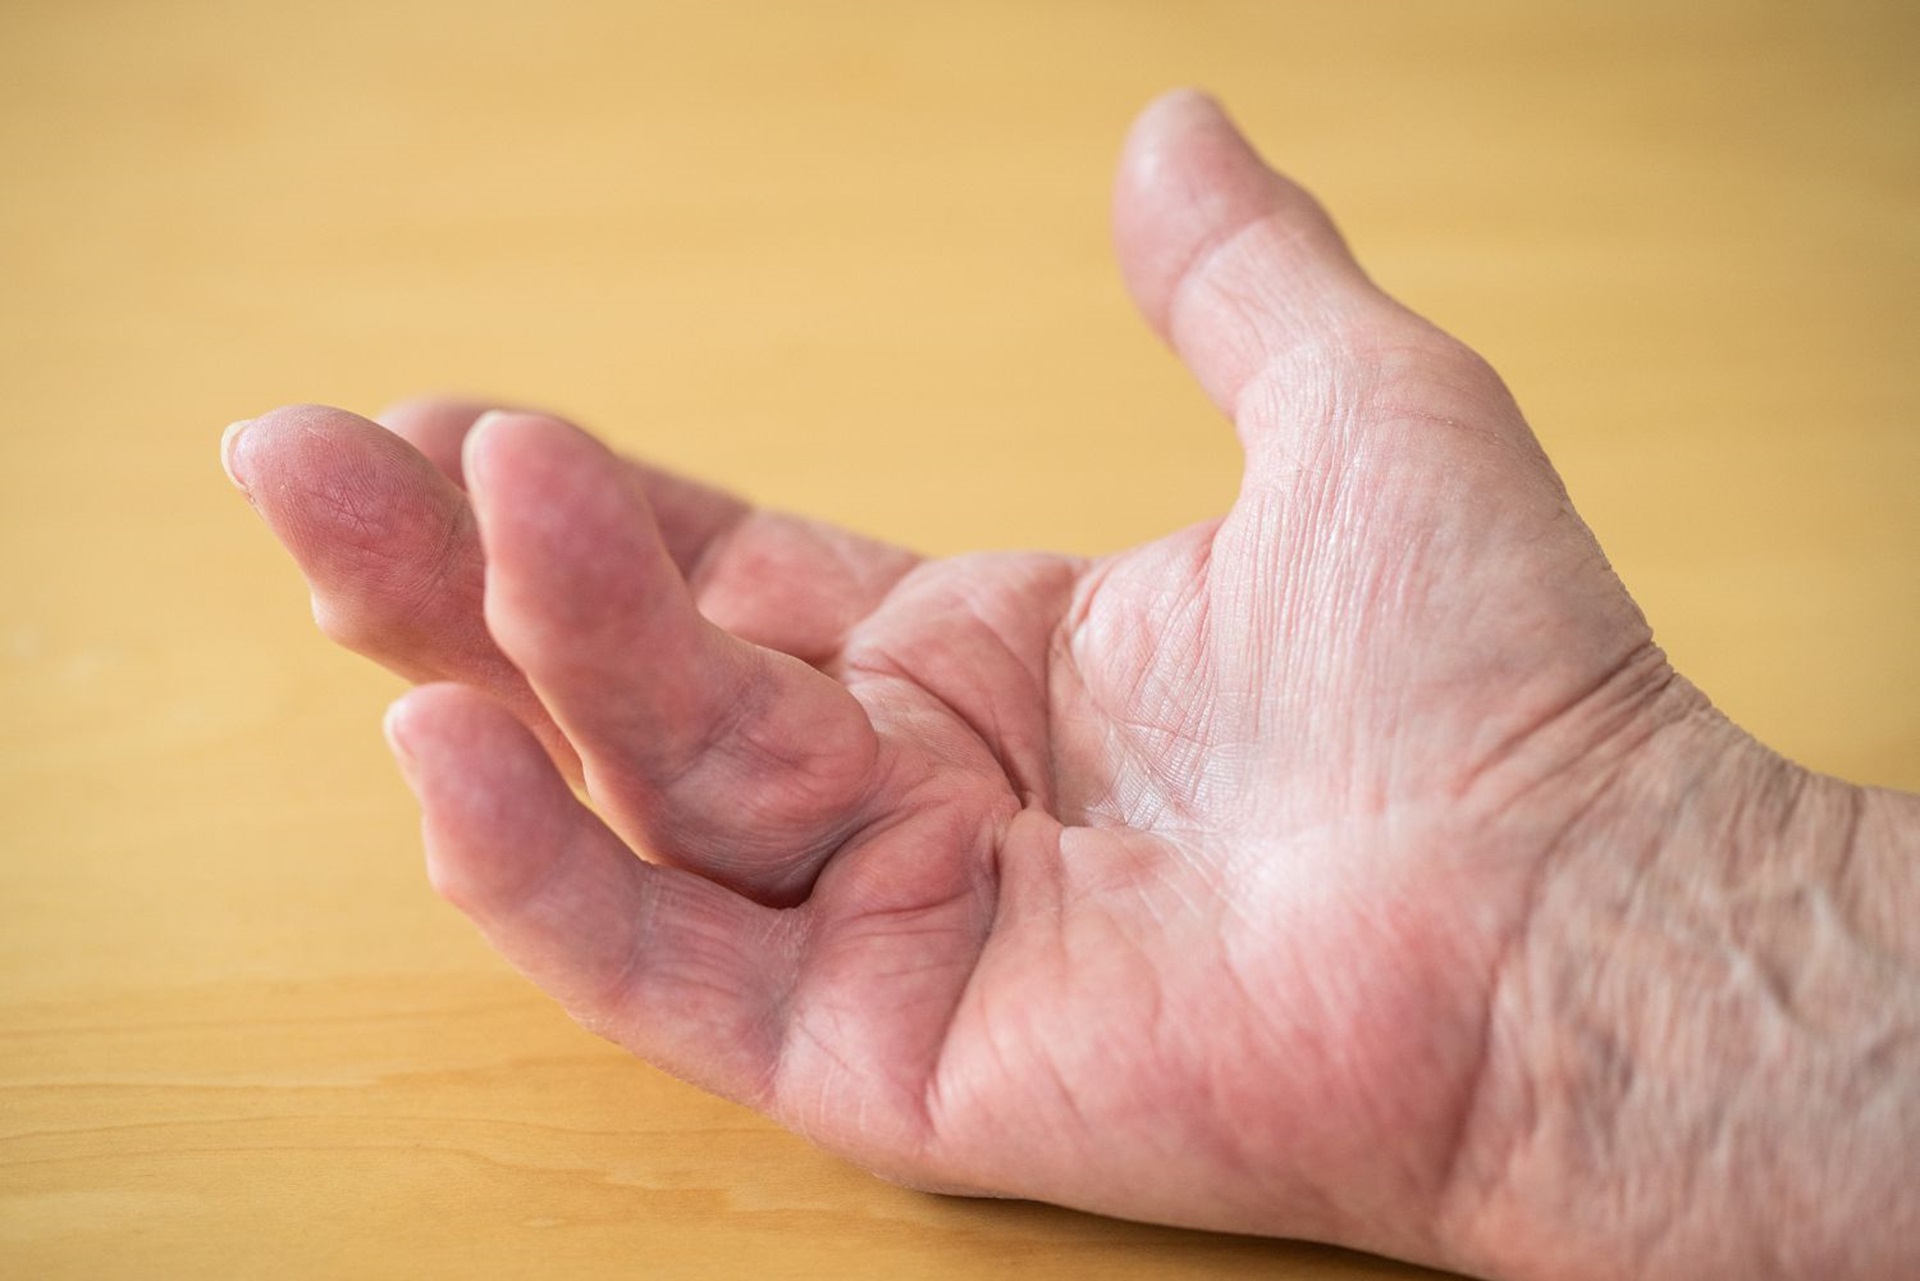 Dos of Dupuytren's contracture in Aberdeen, uk by Dr Jamil Ahmed 